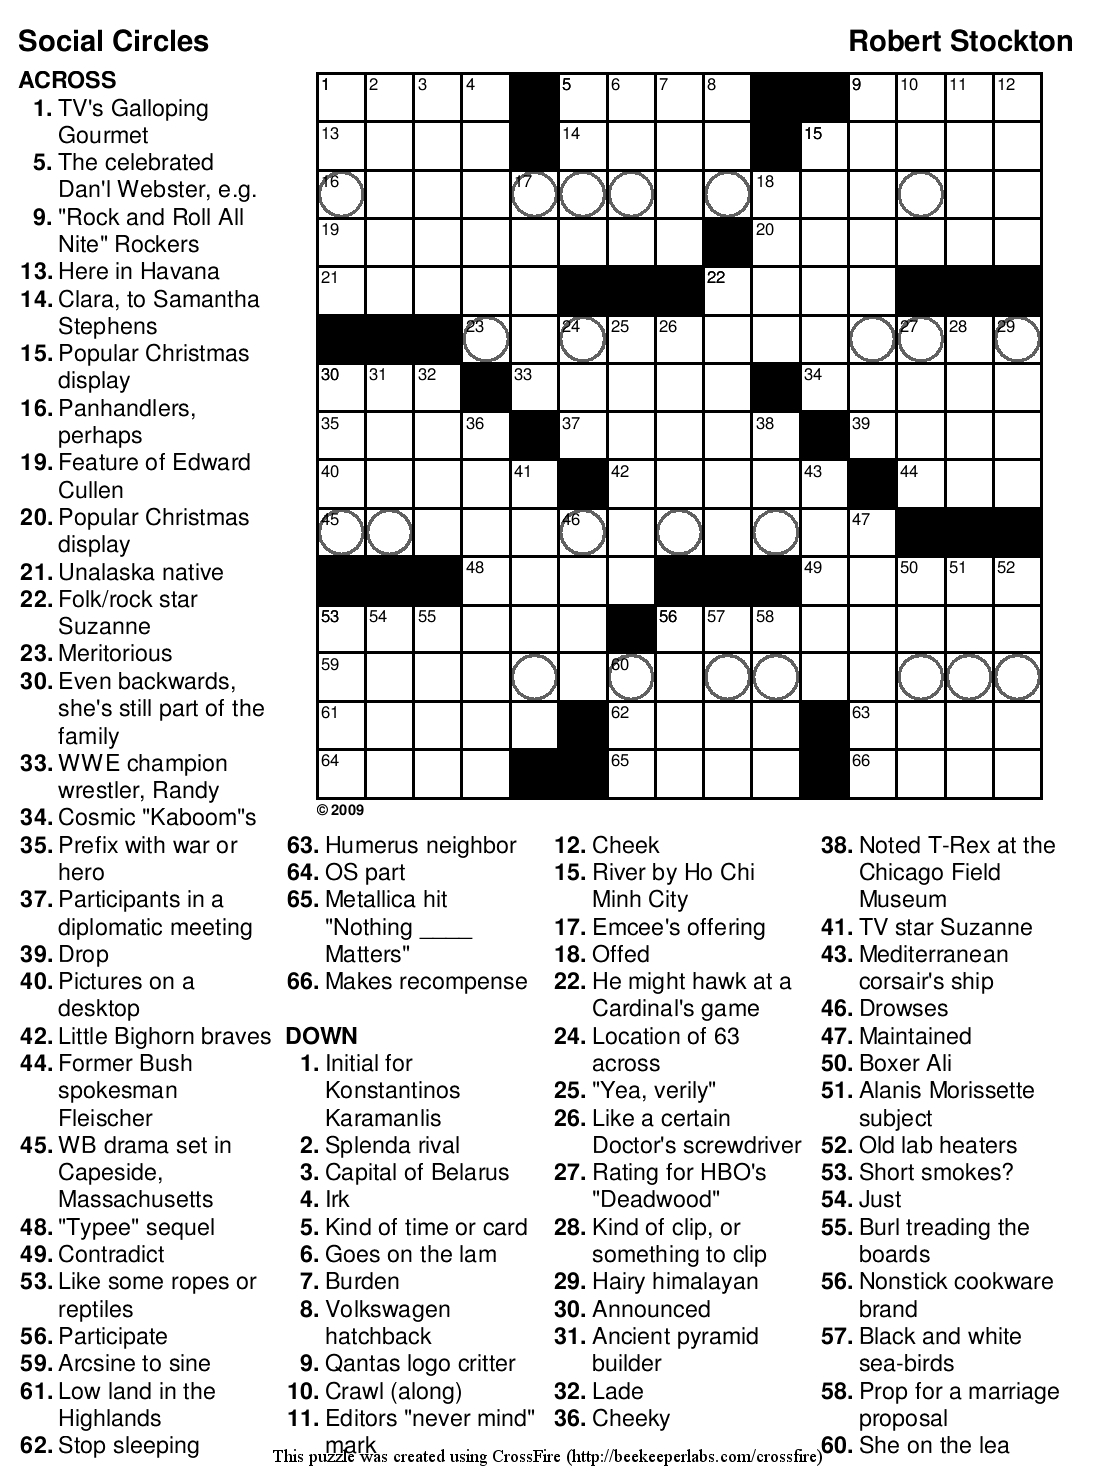 Crossword Puzzles Printable - Yahoo Image Search Results | Crossword - Free Printable Crossword Puzzles